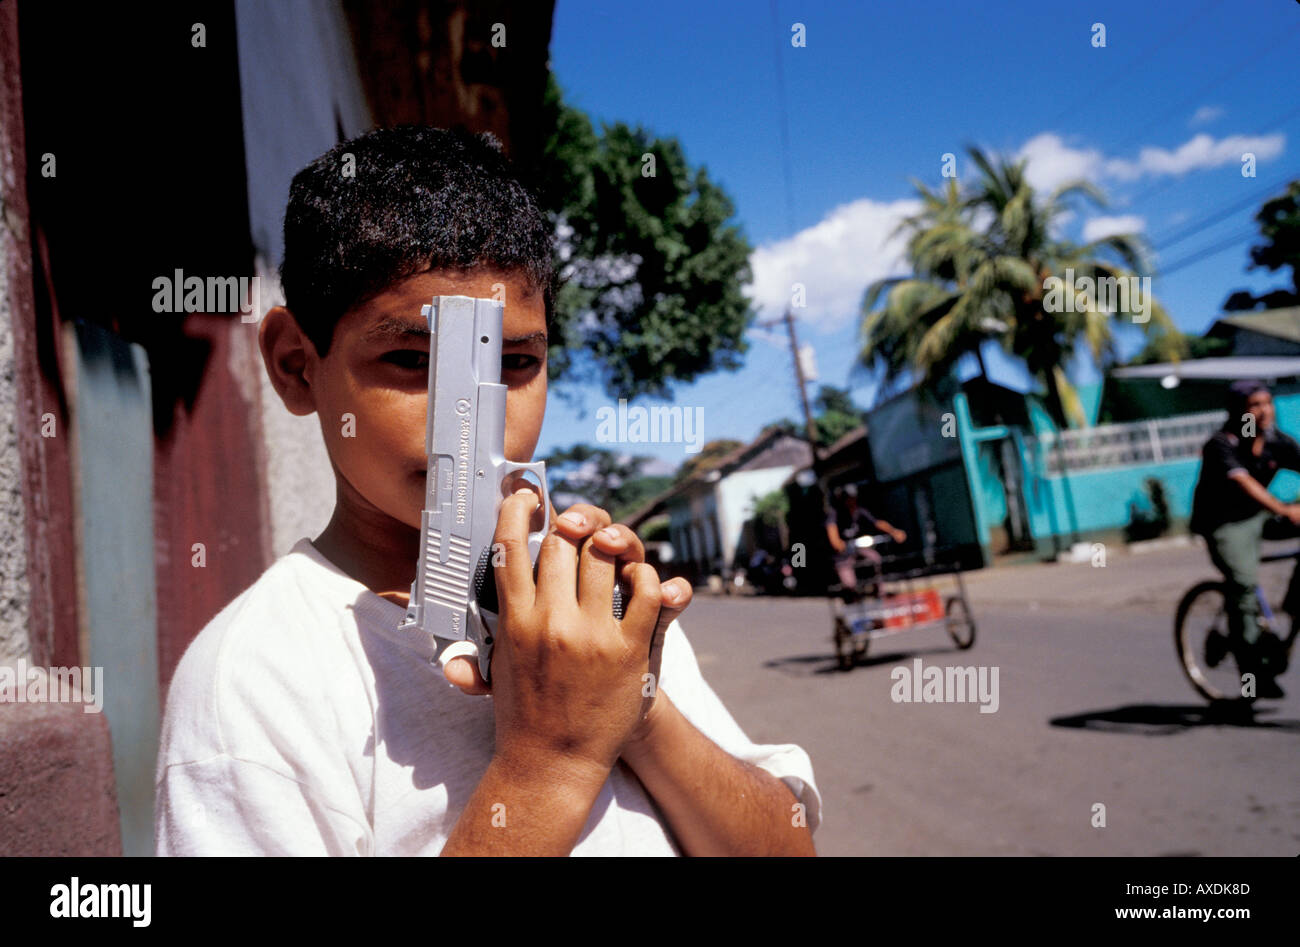 A Nicaraguan boy poses with his plastic toy pistol just like he saw on American television. Stock Photo